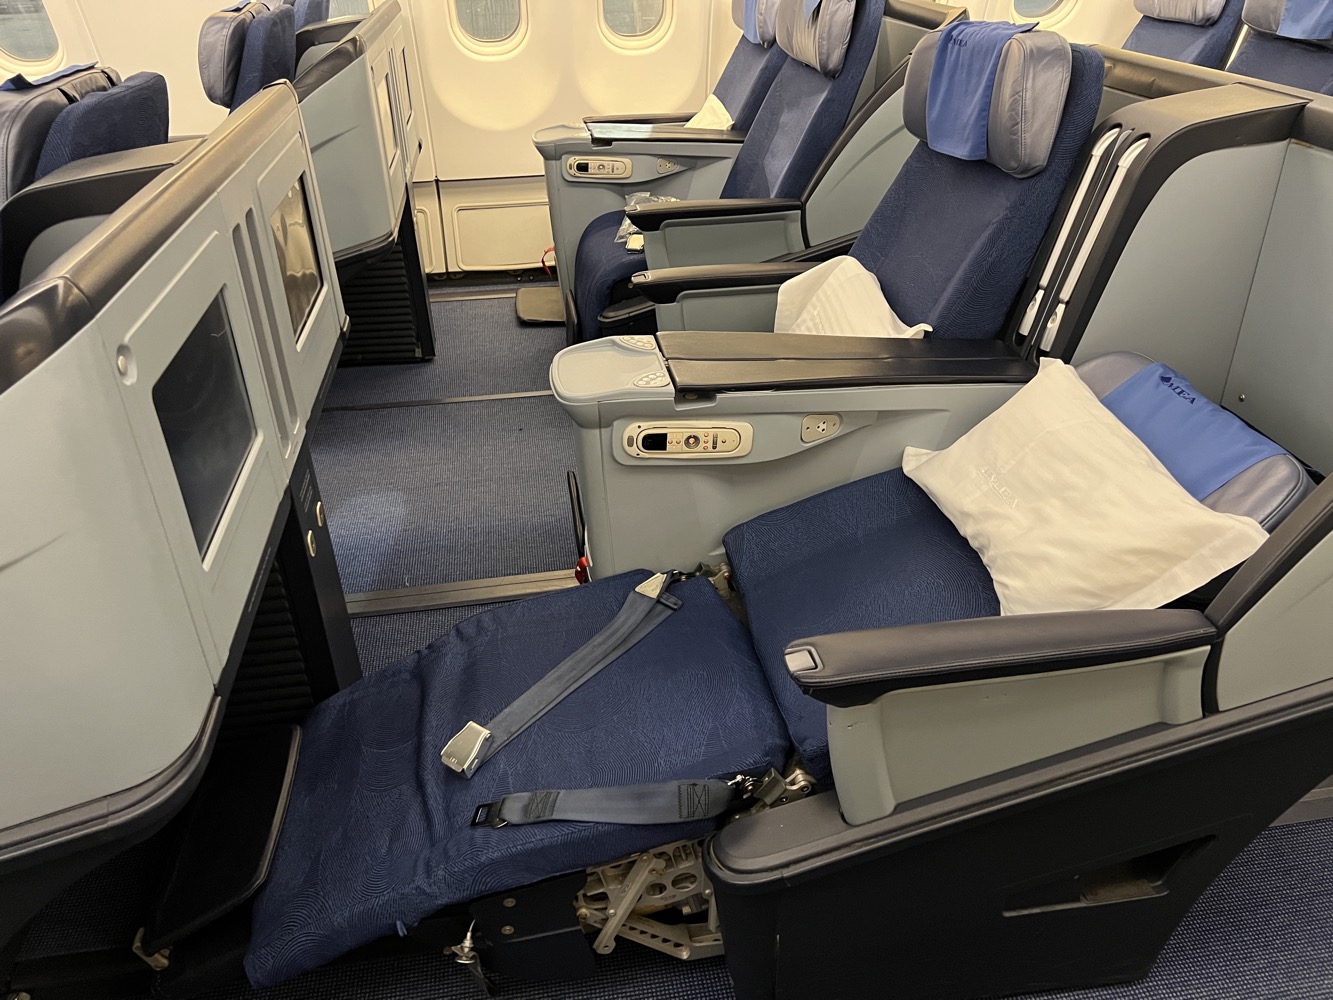 The seats are the first generation angled lie-flat seats manufactured by RECARO. The longest flight MEA serve is about 6 hours to Africa (Lagos, Accra, Abidjan).